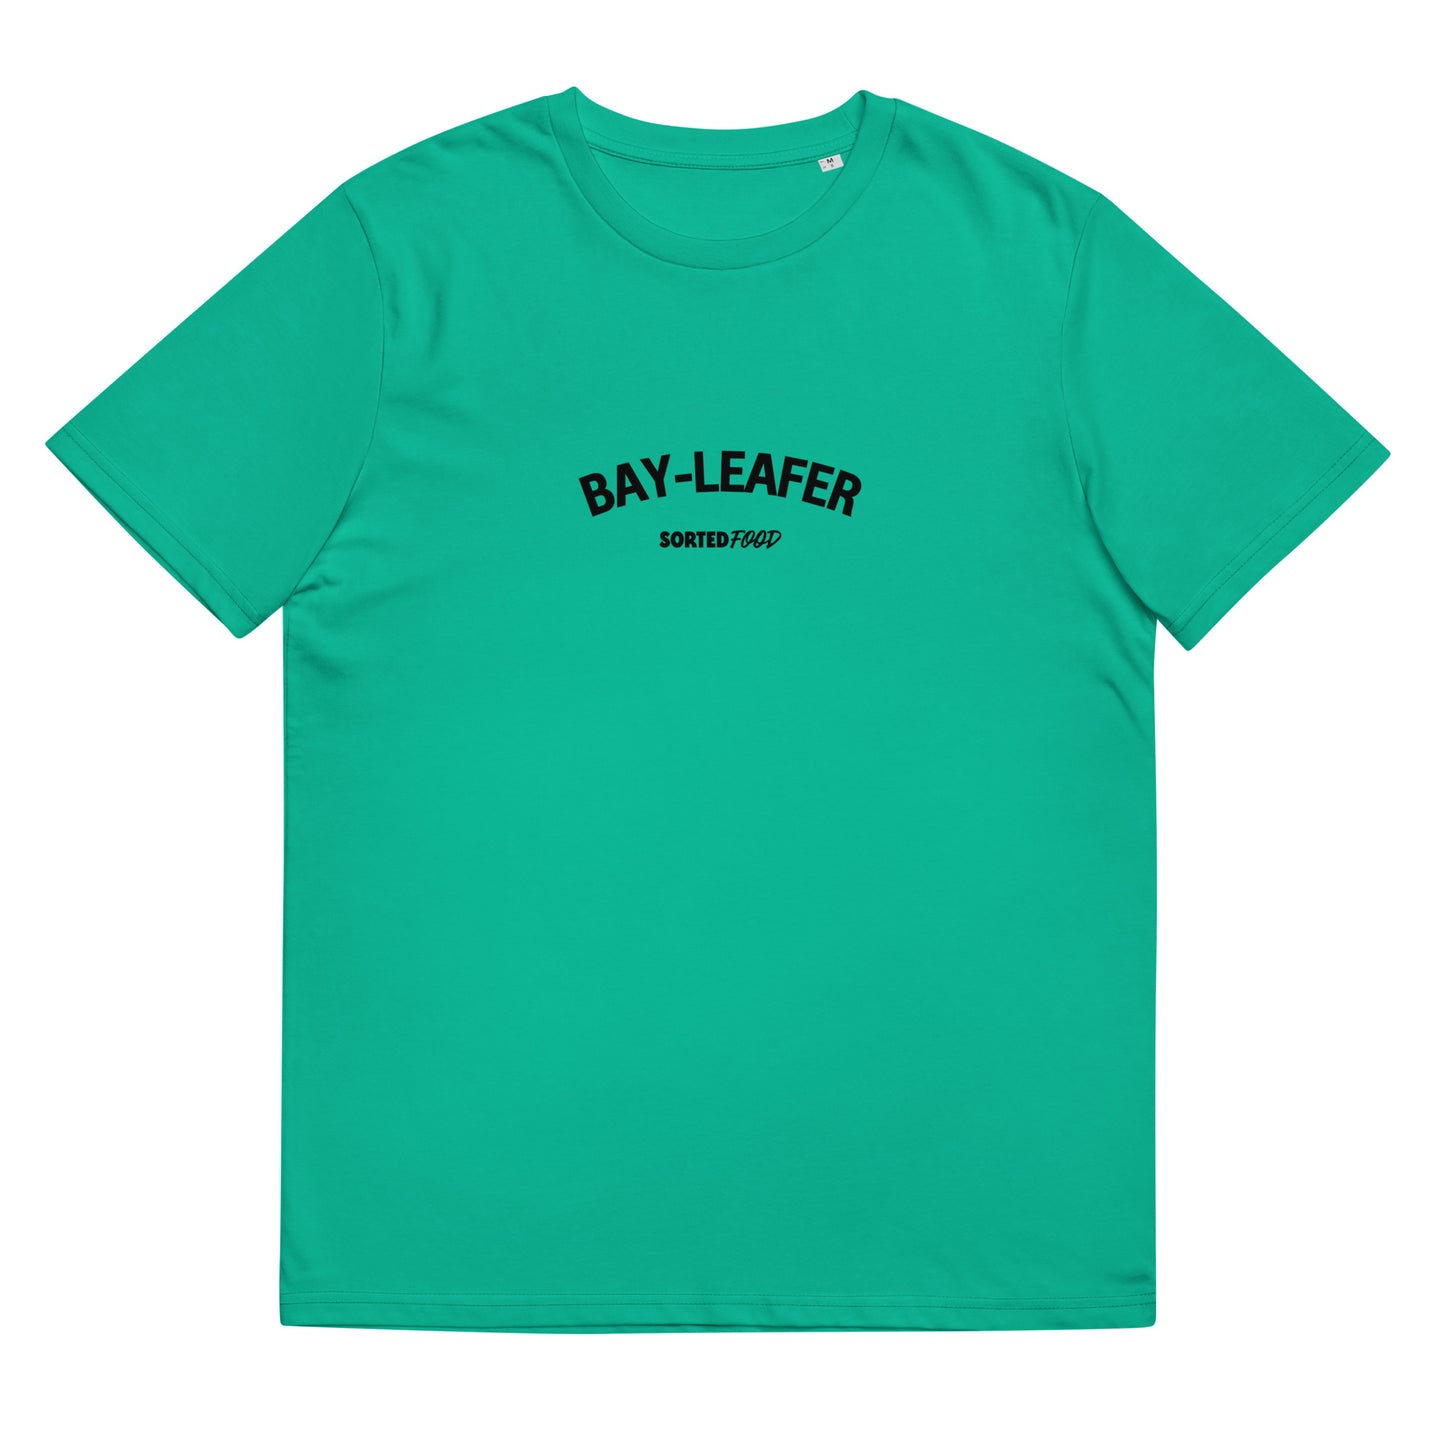 Bay-Leafer Tee